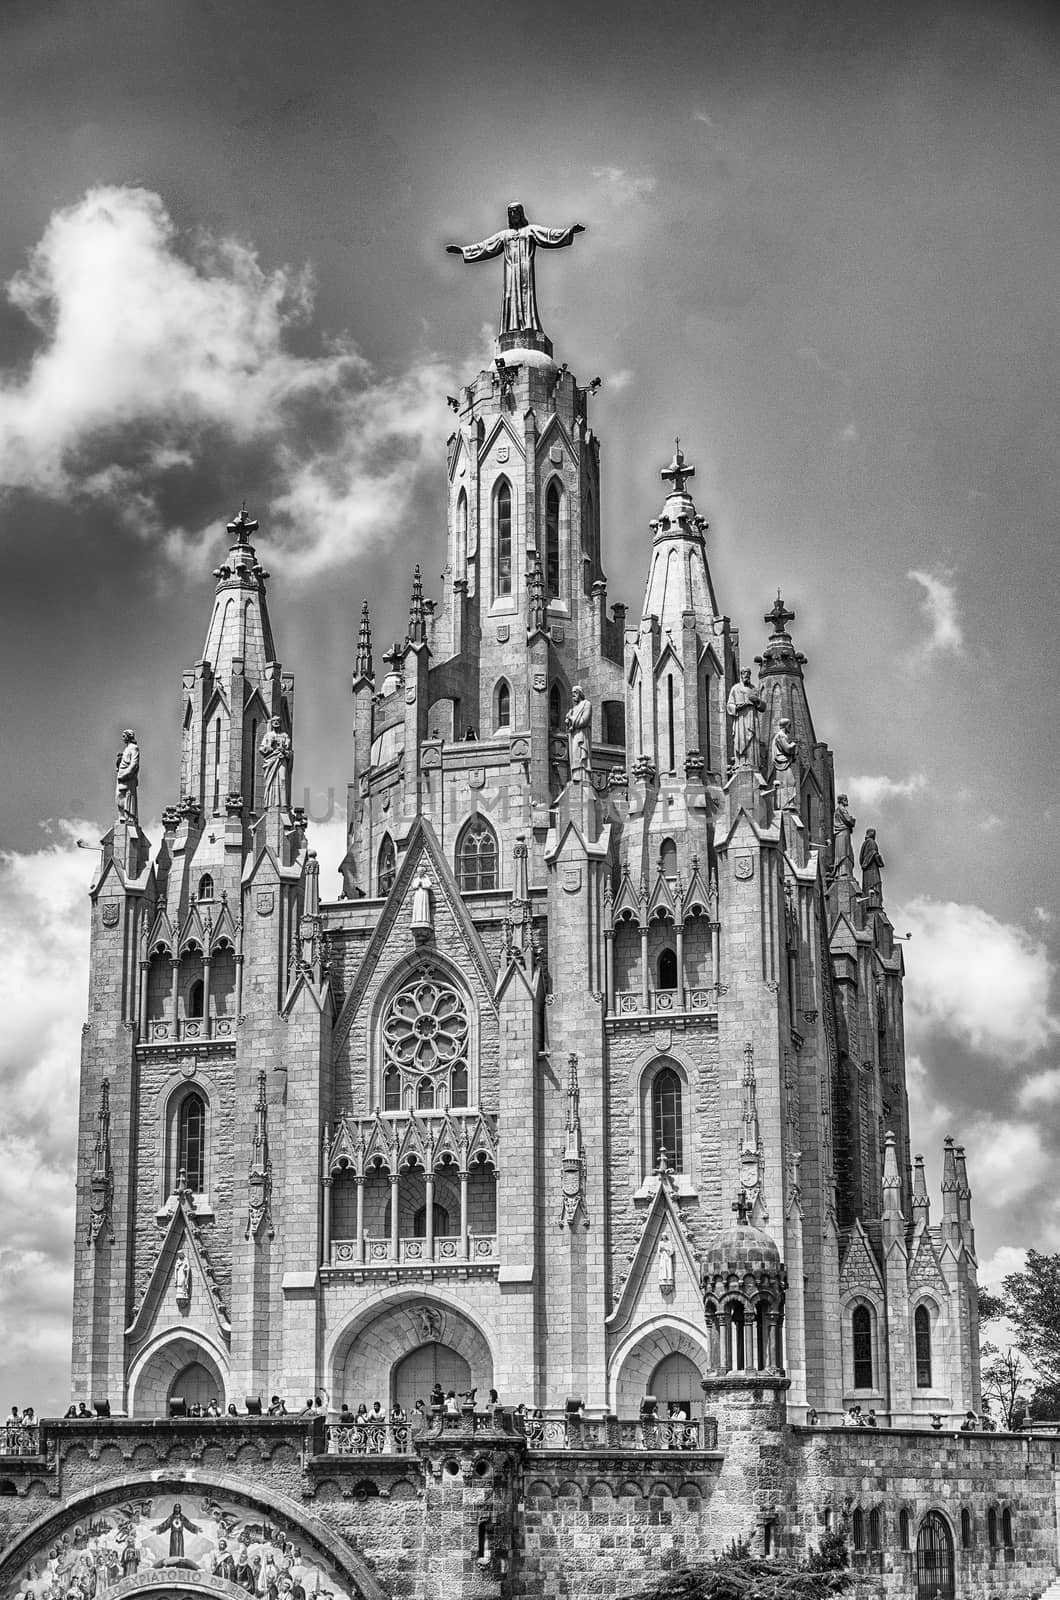 Expiatory Church of the Sacred Heart of Jesus, a Roman Catholic church and minor basilica located on the summit of Mount Tibidabo in Barcelona, Catalonia, Spain